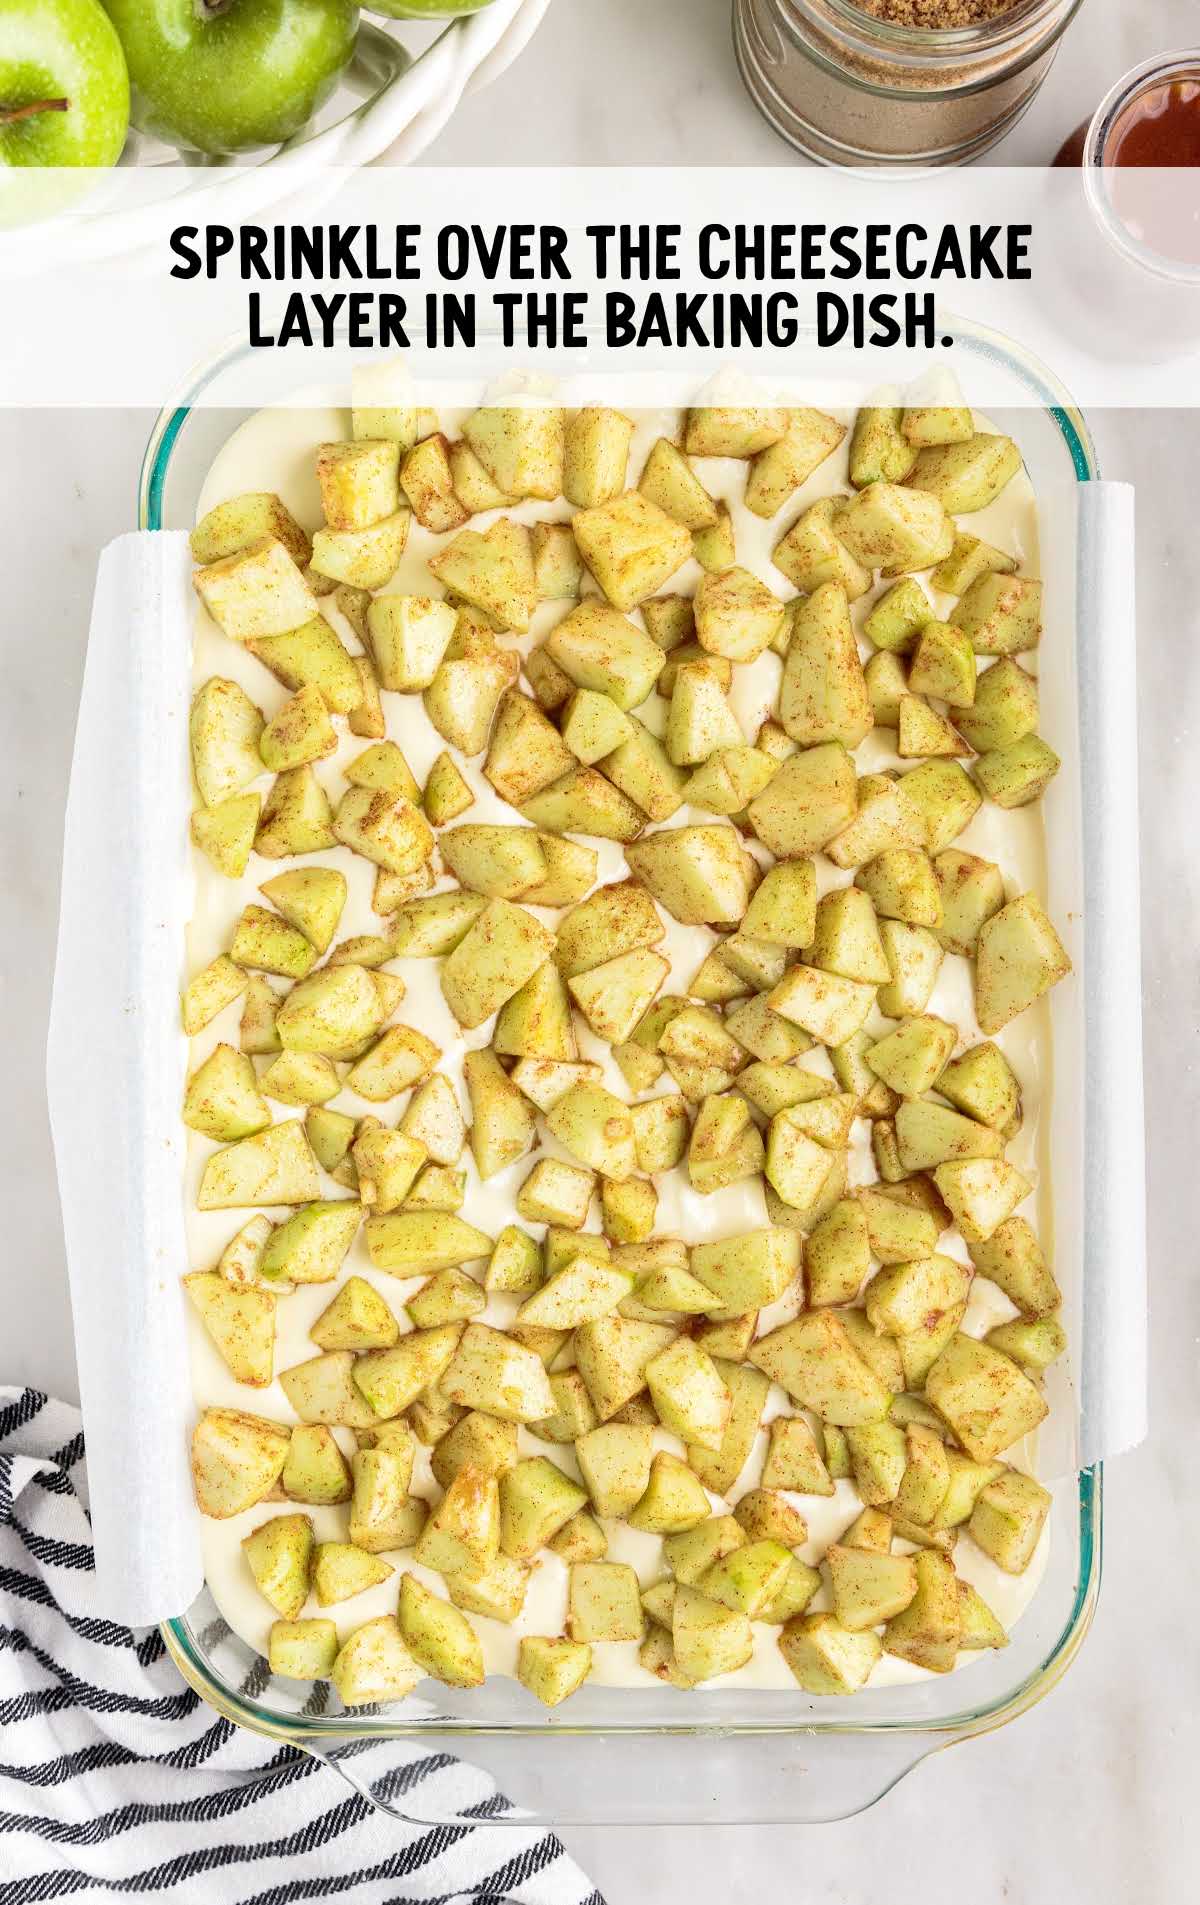 cinnamon apples sprinkled over the cheesecake layer in the baking dish